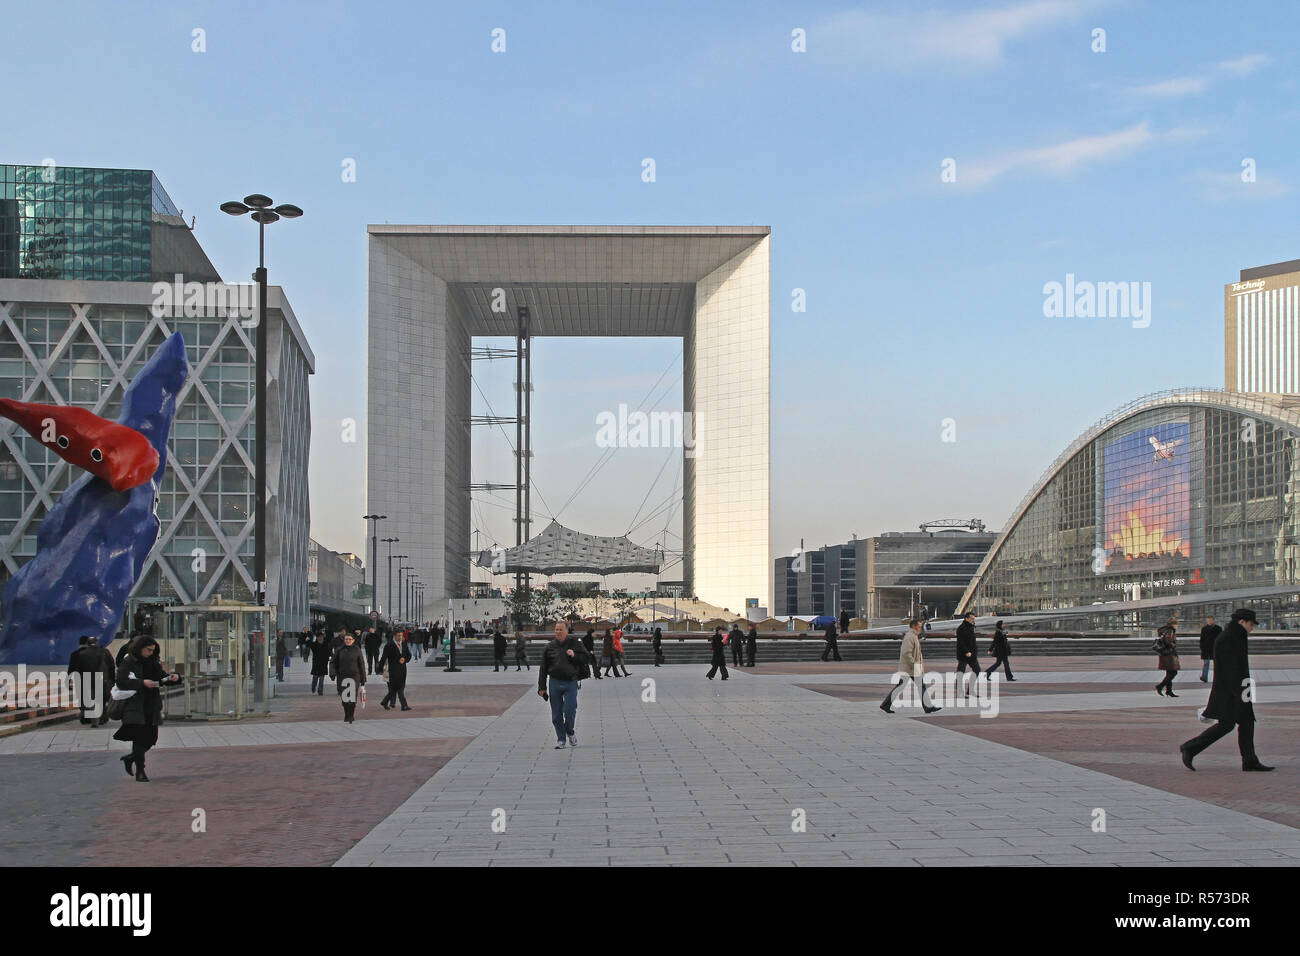 PARIS, FRANCE - JANUARY 05: Grande Arche in Paris on JANUARY 05, 2010. People Walking at the Plaza at La Defense Business District and Grande Arche in Stock Photo